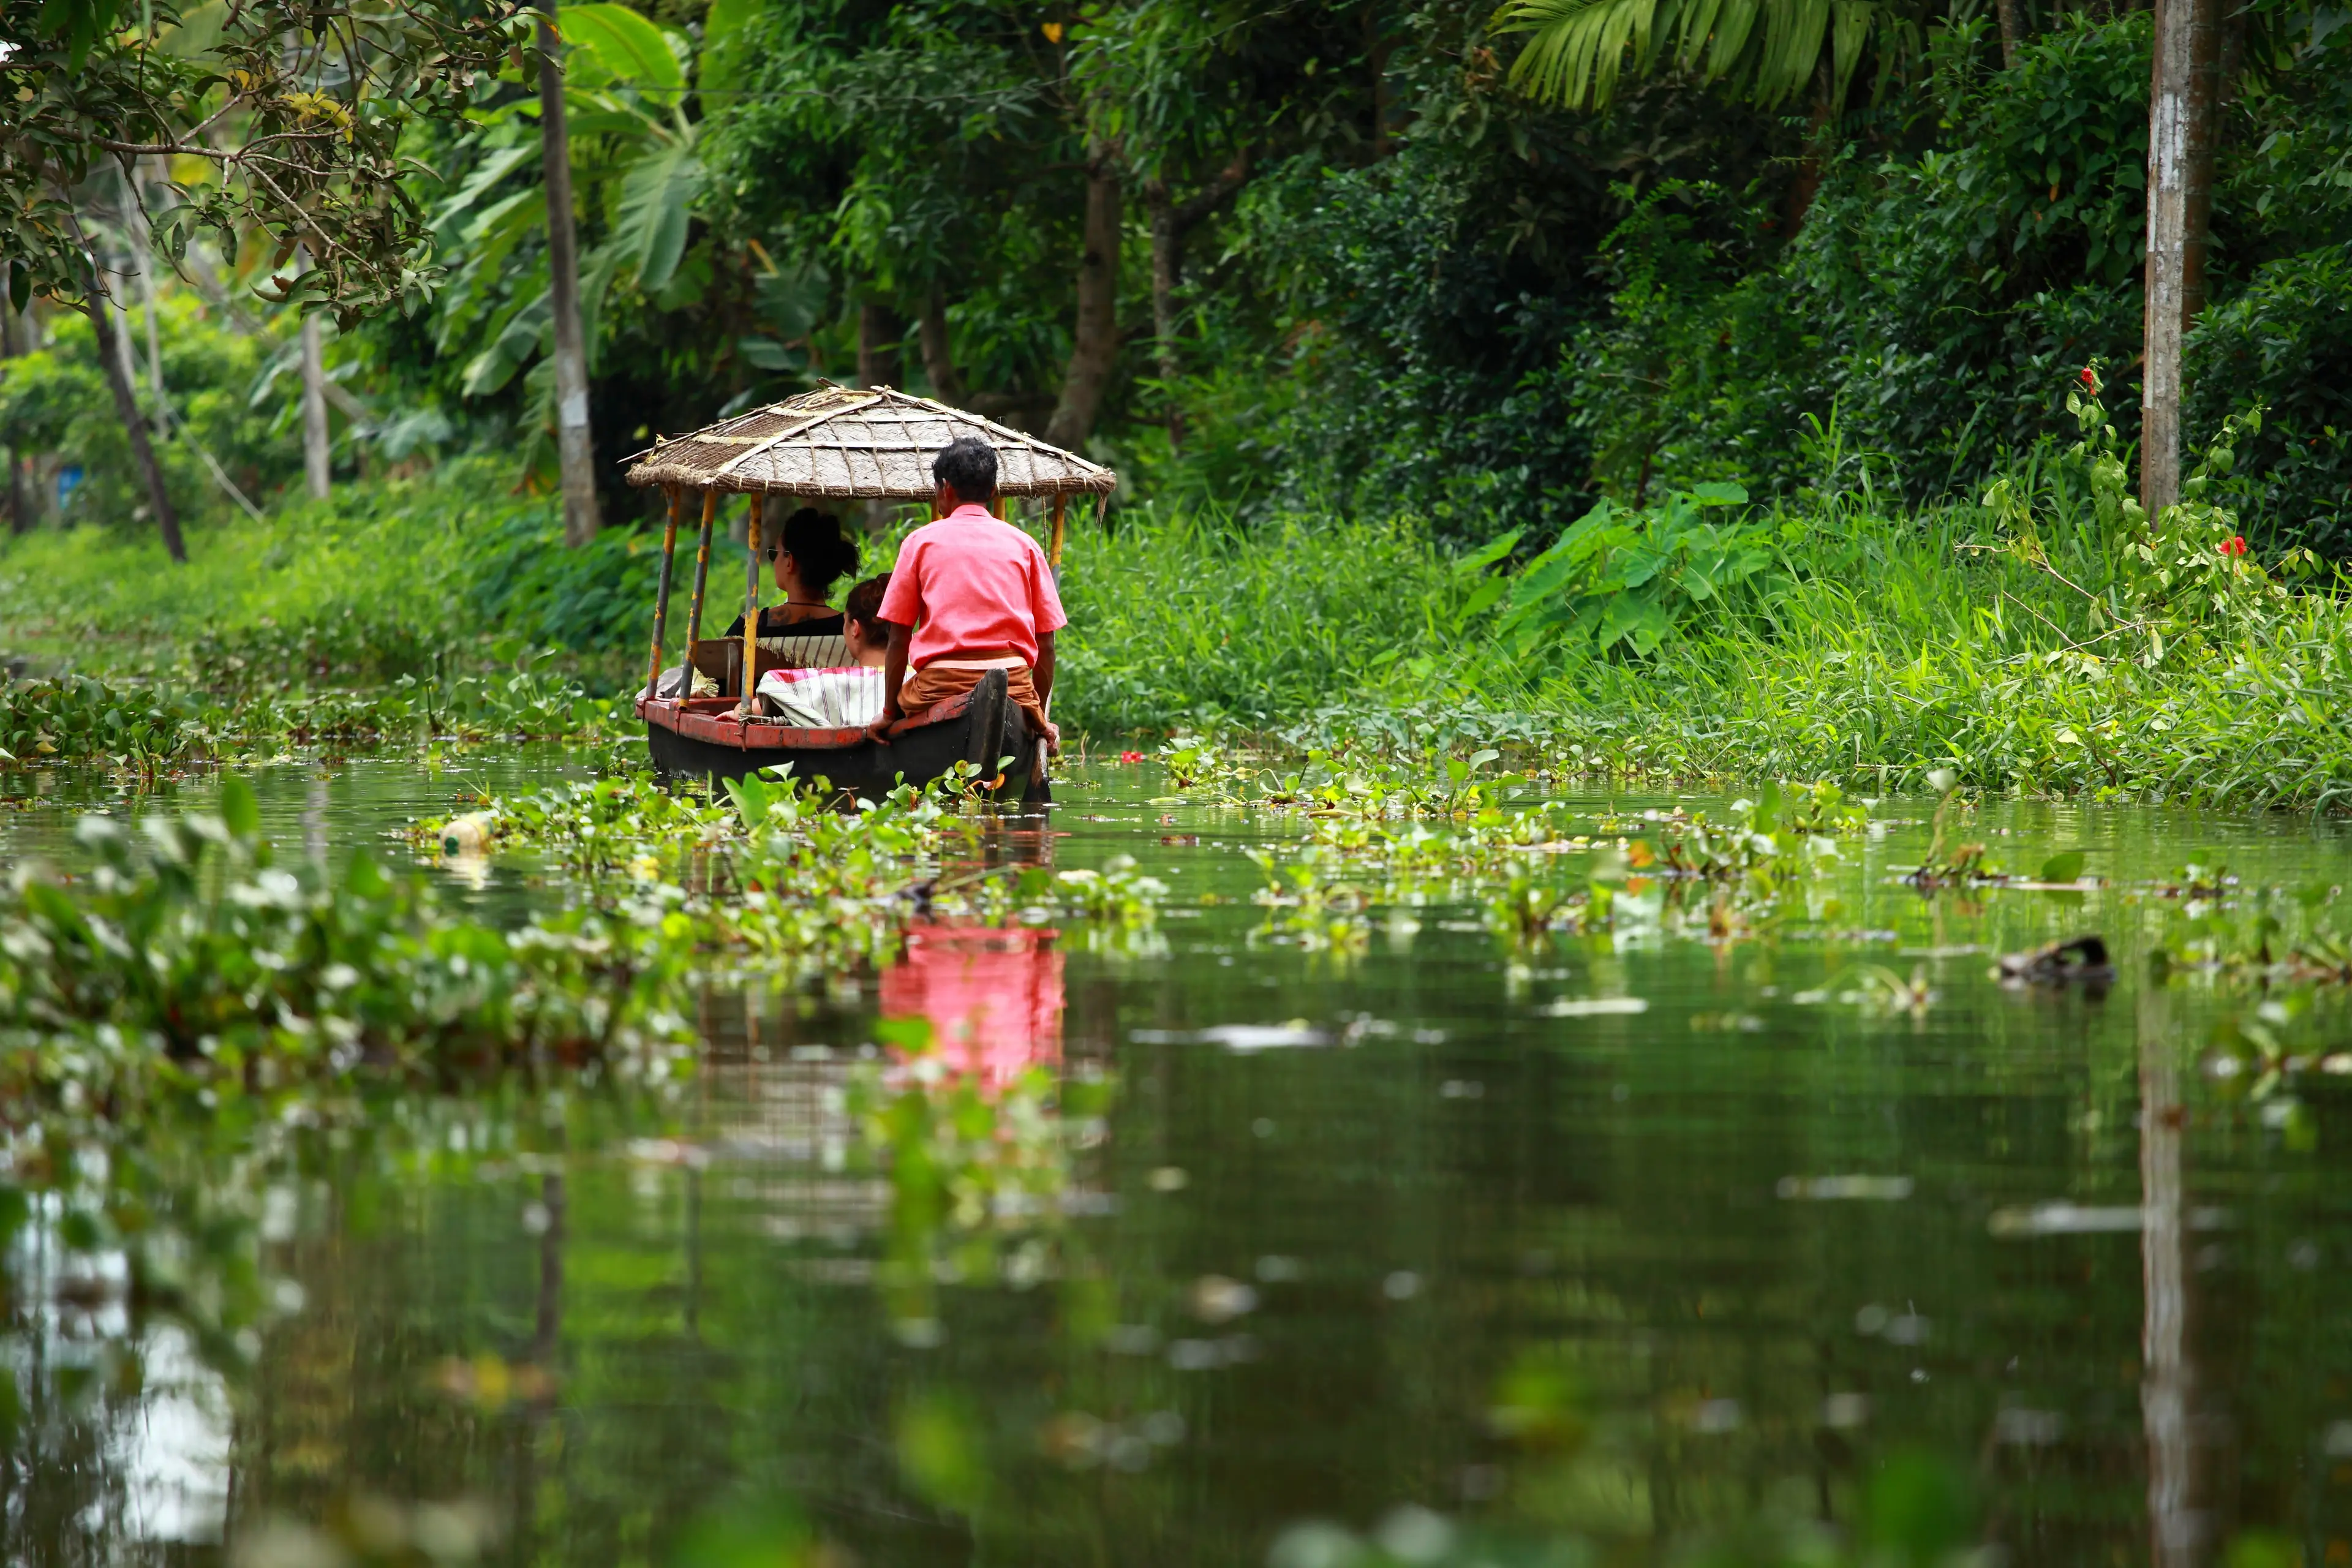 Boat transporting people through a lush tropical forest